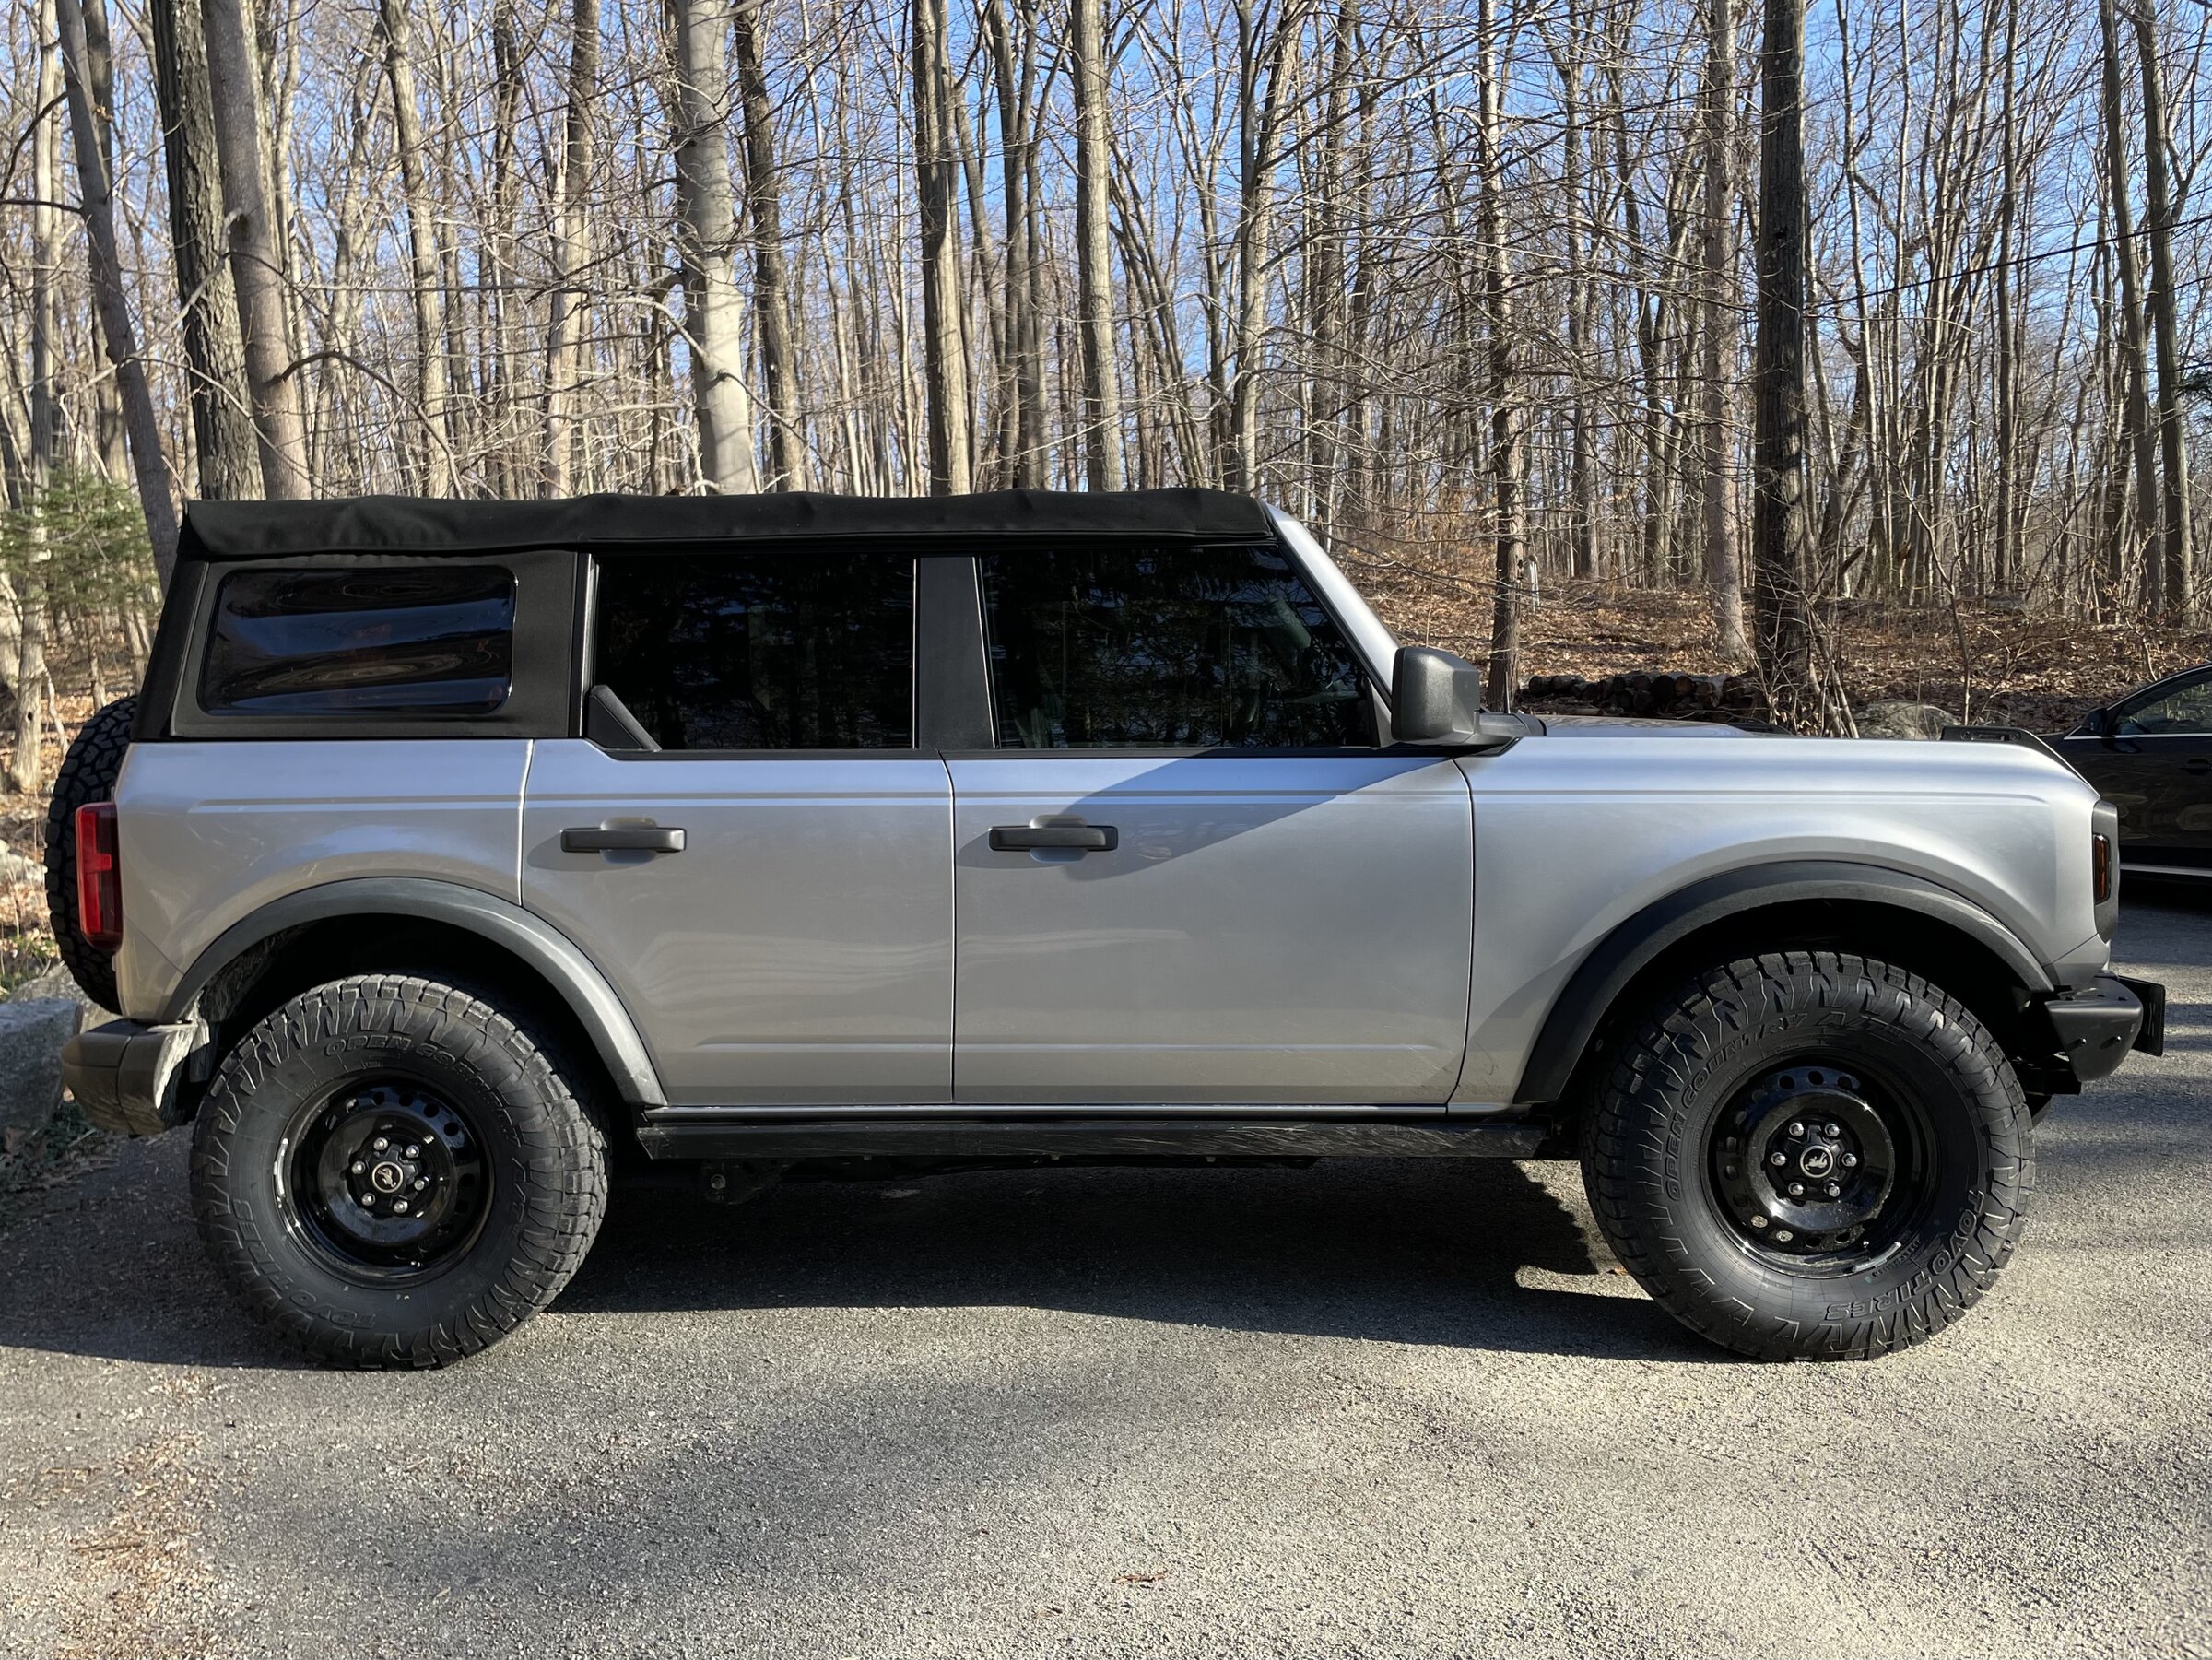 Ford Bronco Bronco Sasquatch suspension parts (shocks & springs) price quoted at $1300 from dealer parts department E520820C-30C8-42D0-A20B-B3E3BF77E15A